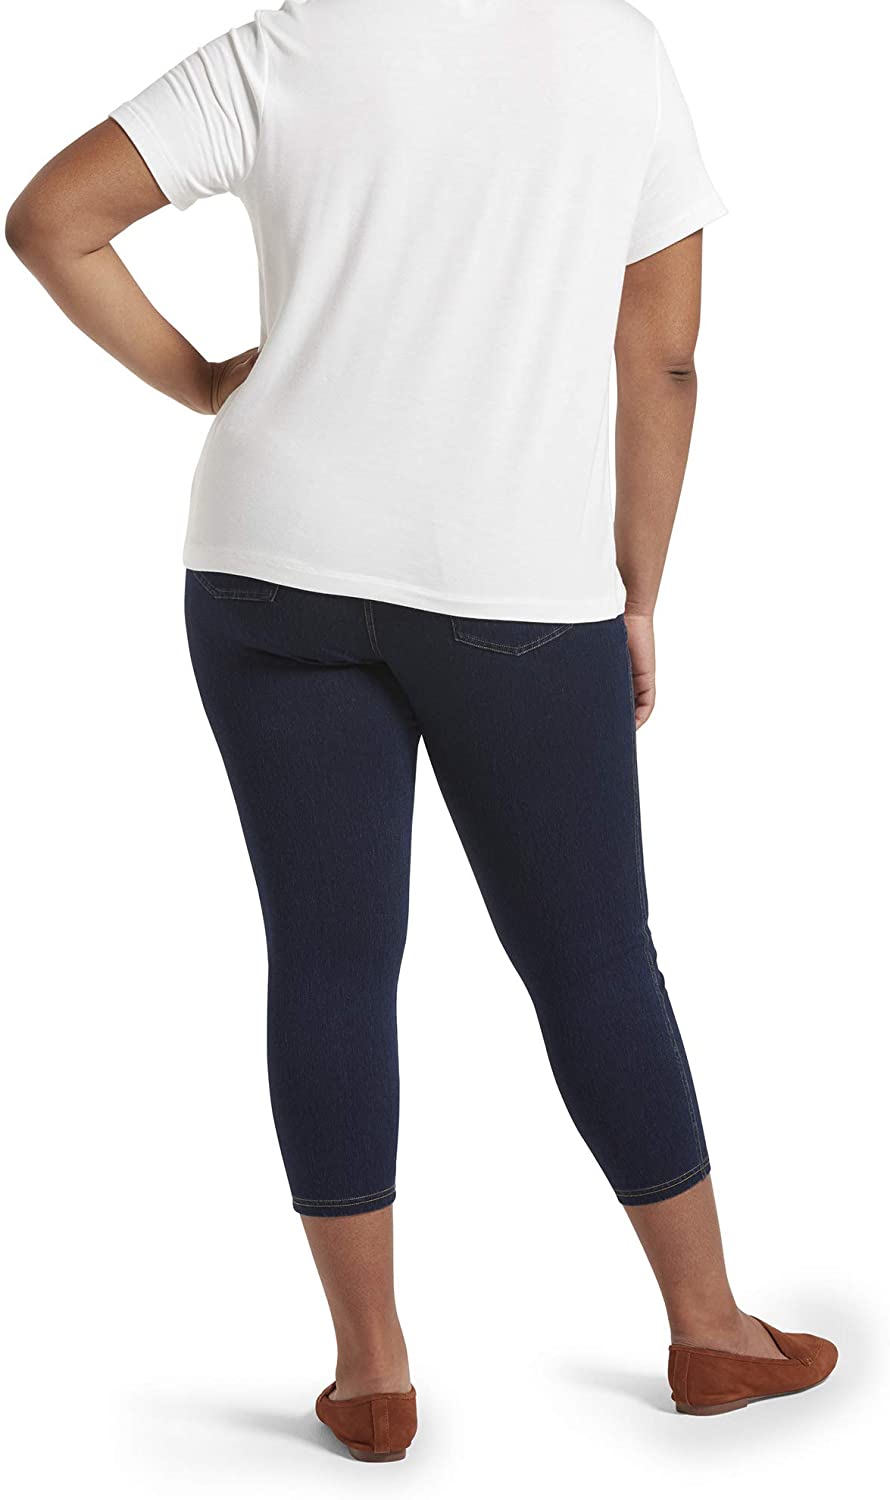 NWT No Nonsense Pull On Classic Denim Leggings - $10 New With Tags - From  Mallory